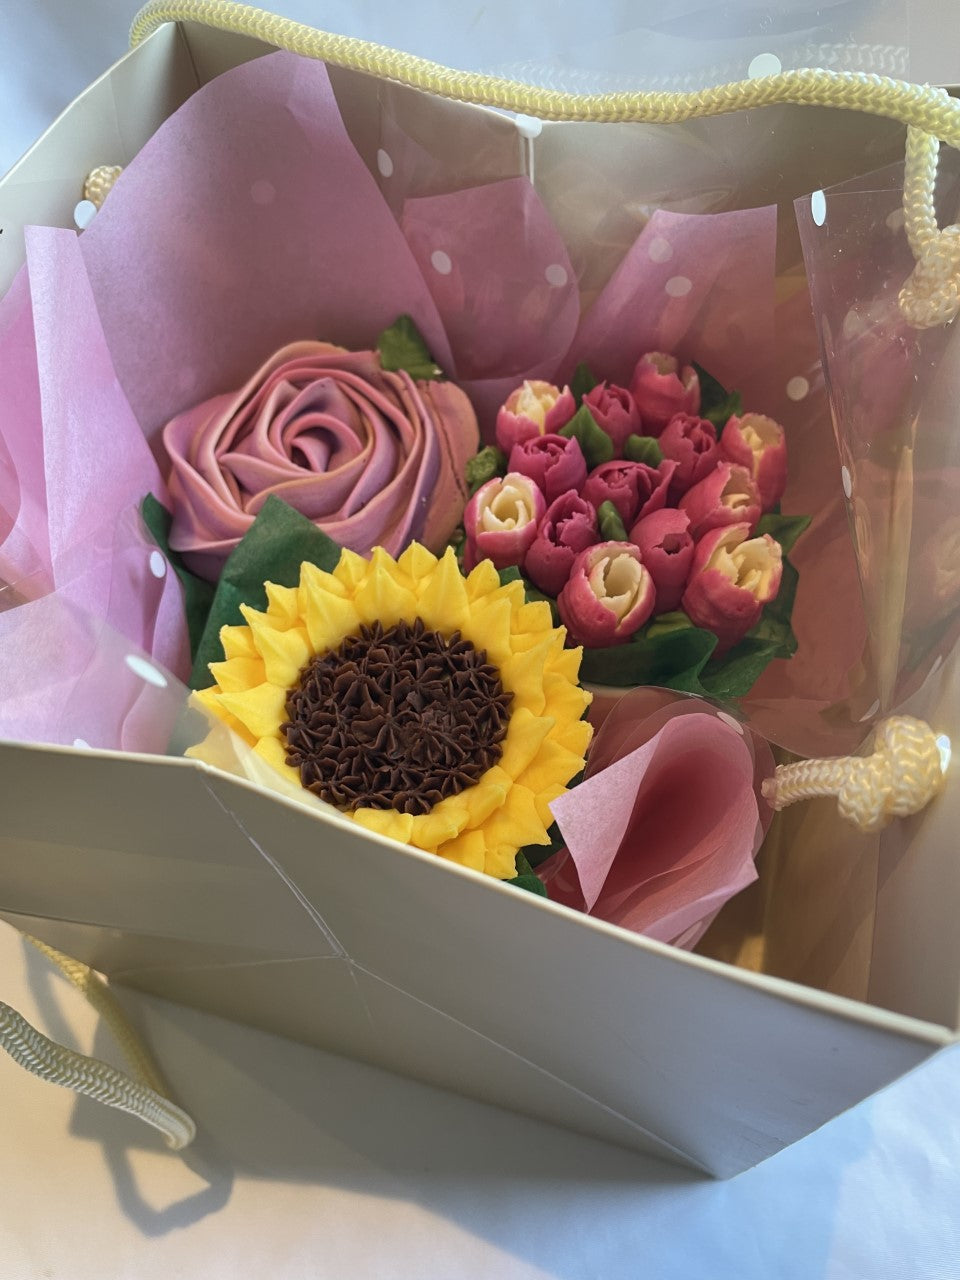 Gift Bags of 3 Mixed Flowers - Buy 2 bags for £25